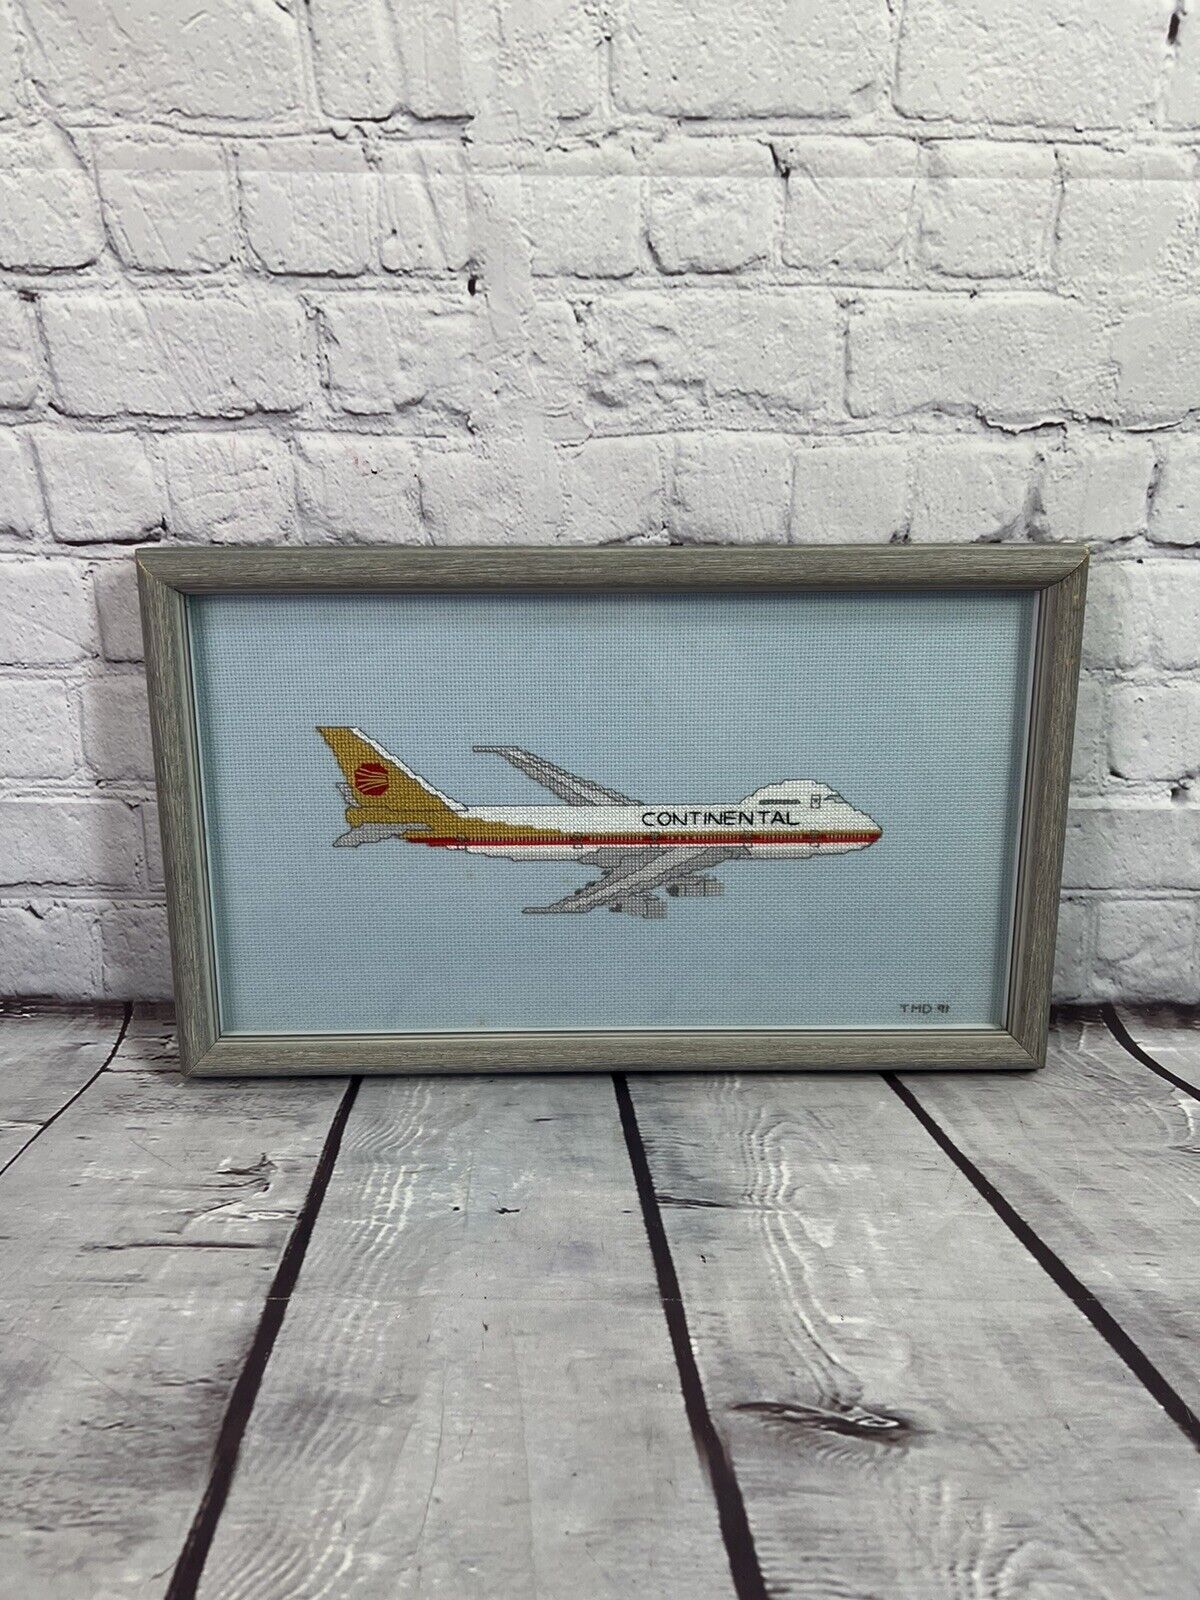 Vintage Boeing 747 Continental Airlines Cross Stitch Framed Airplane Art 16 x 9